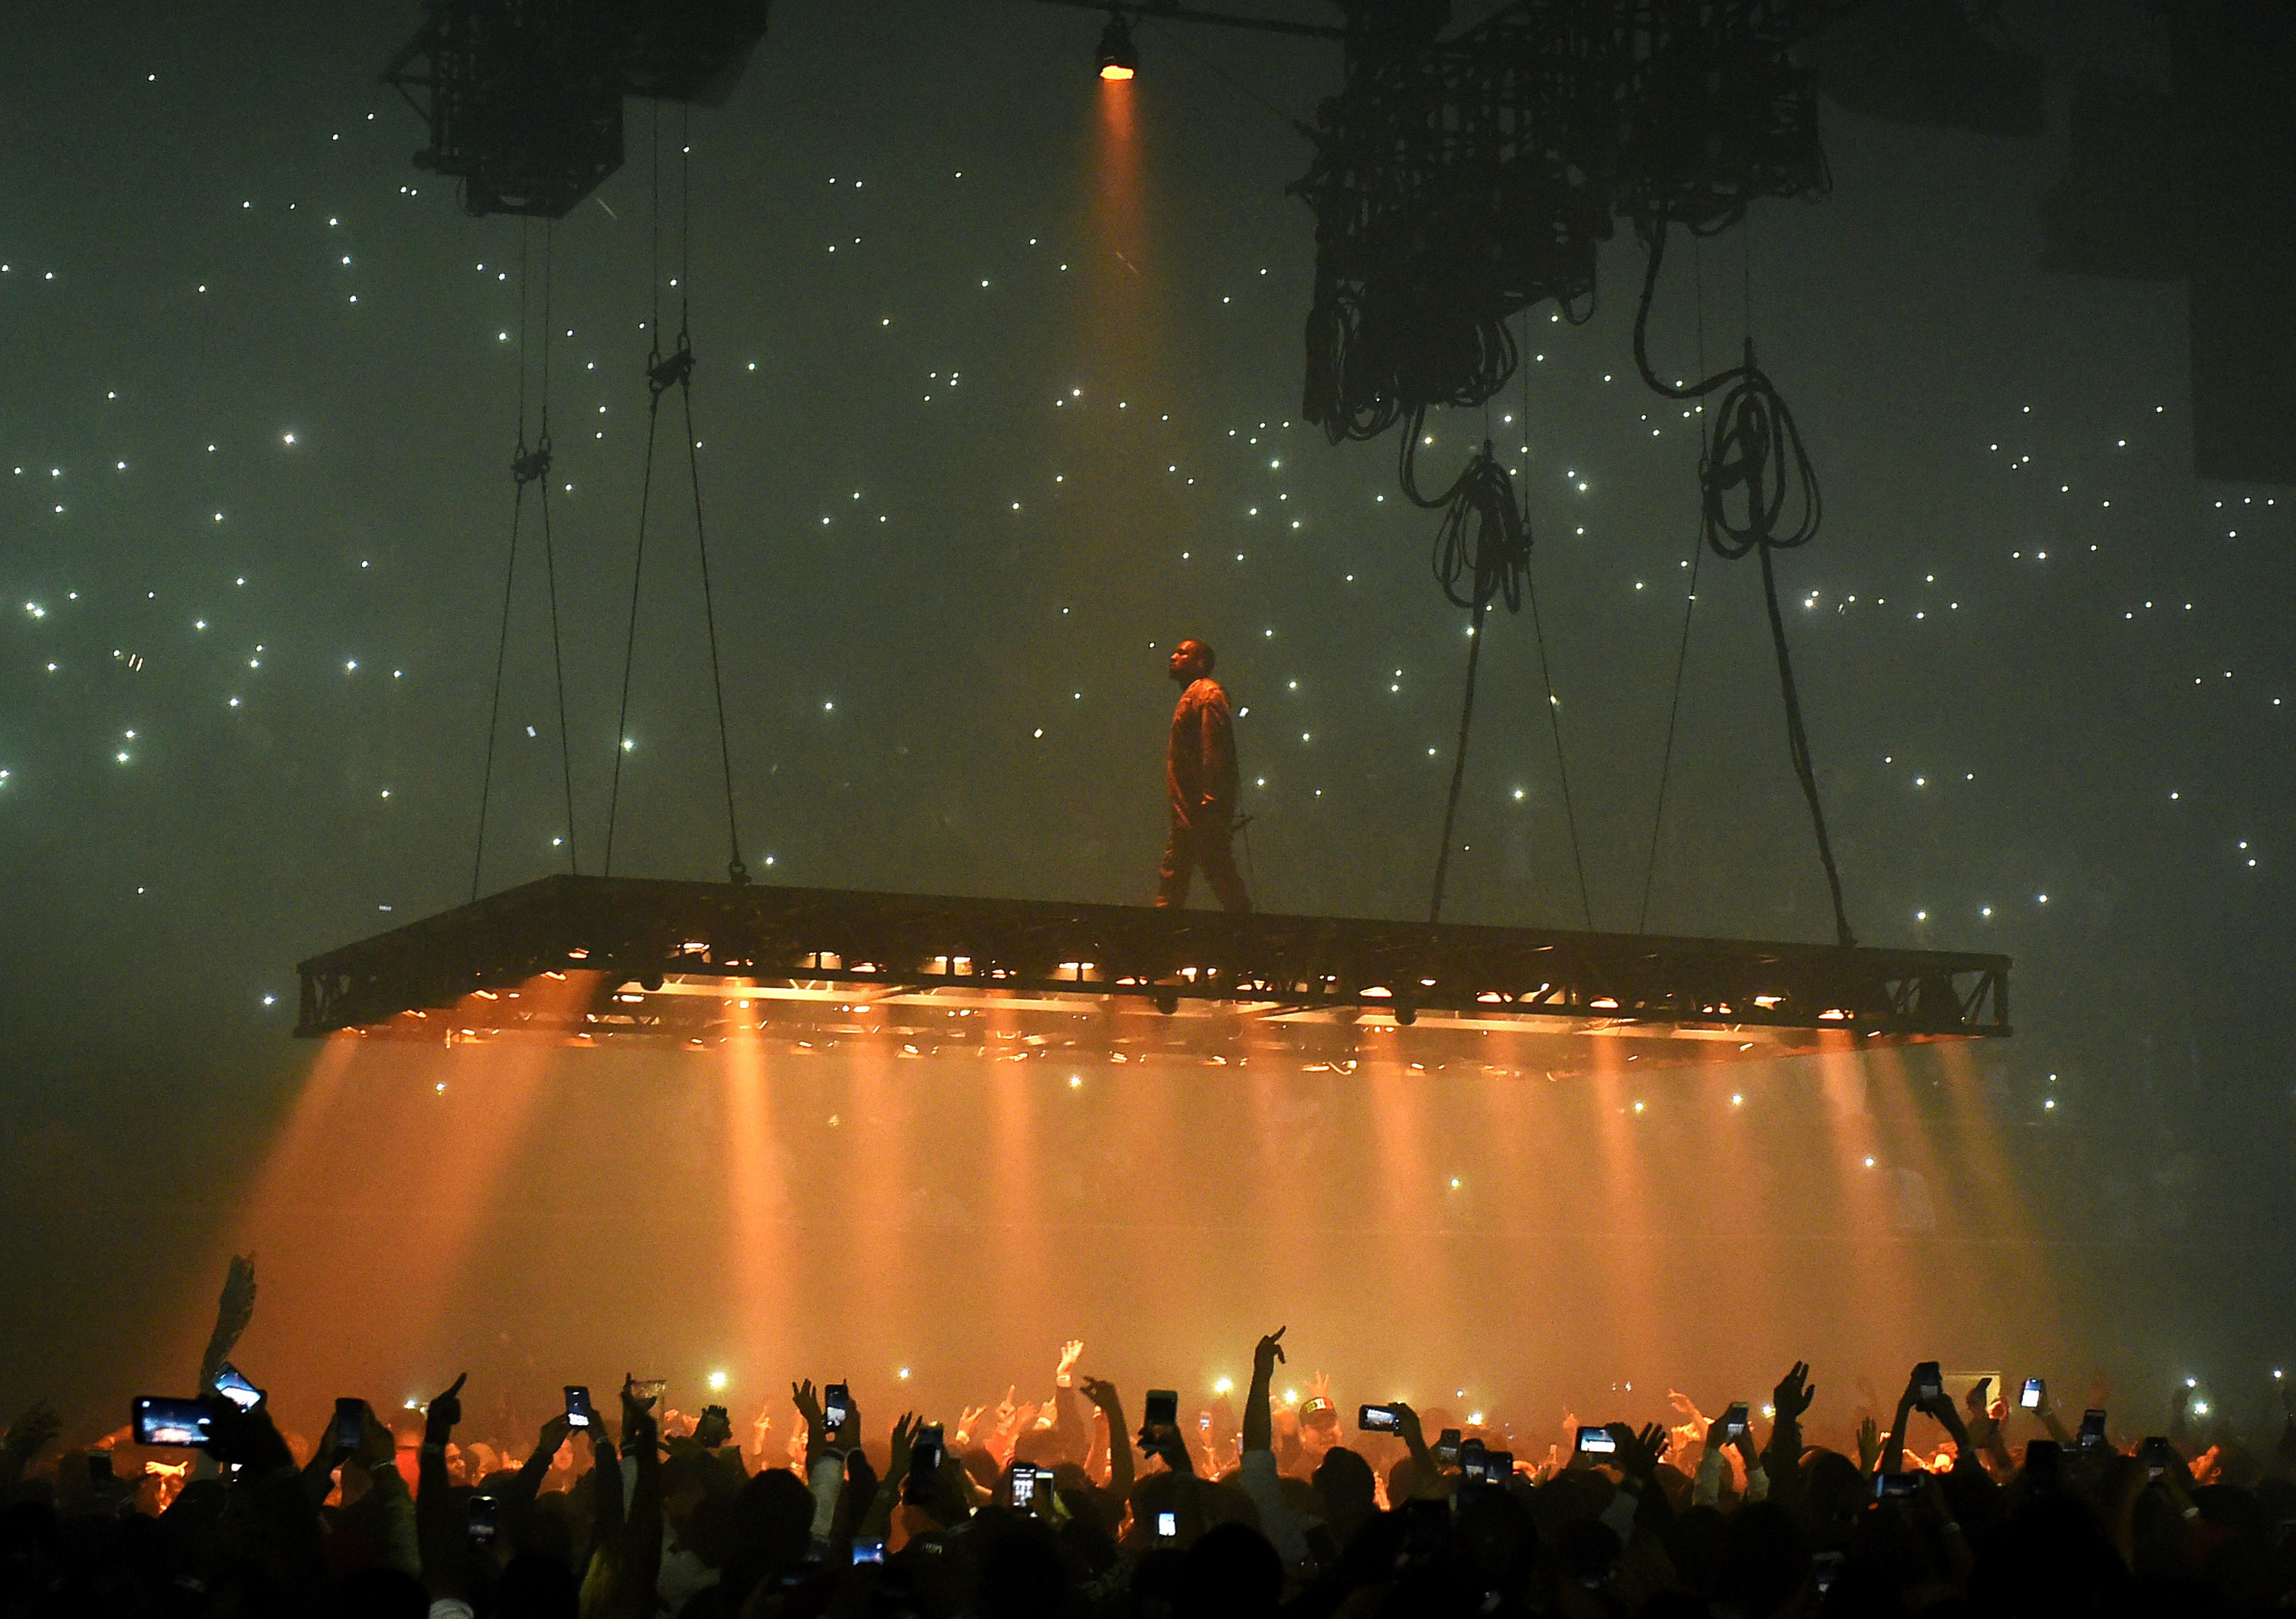 Rapper Kanye West performs at the Forum on October 25, 2016 in Inglewood, California. (Photo by Kevin Winter/Getty Images)